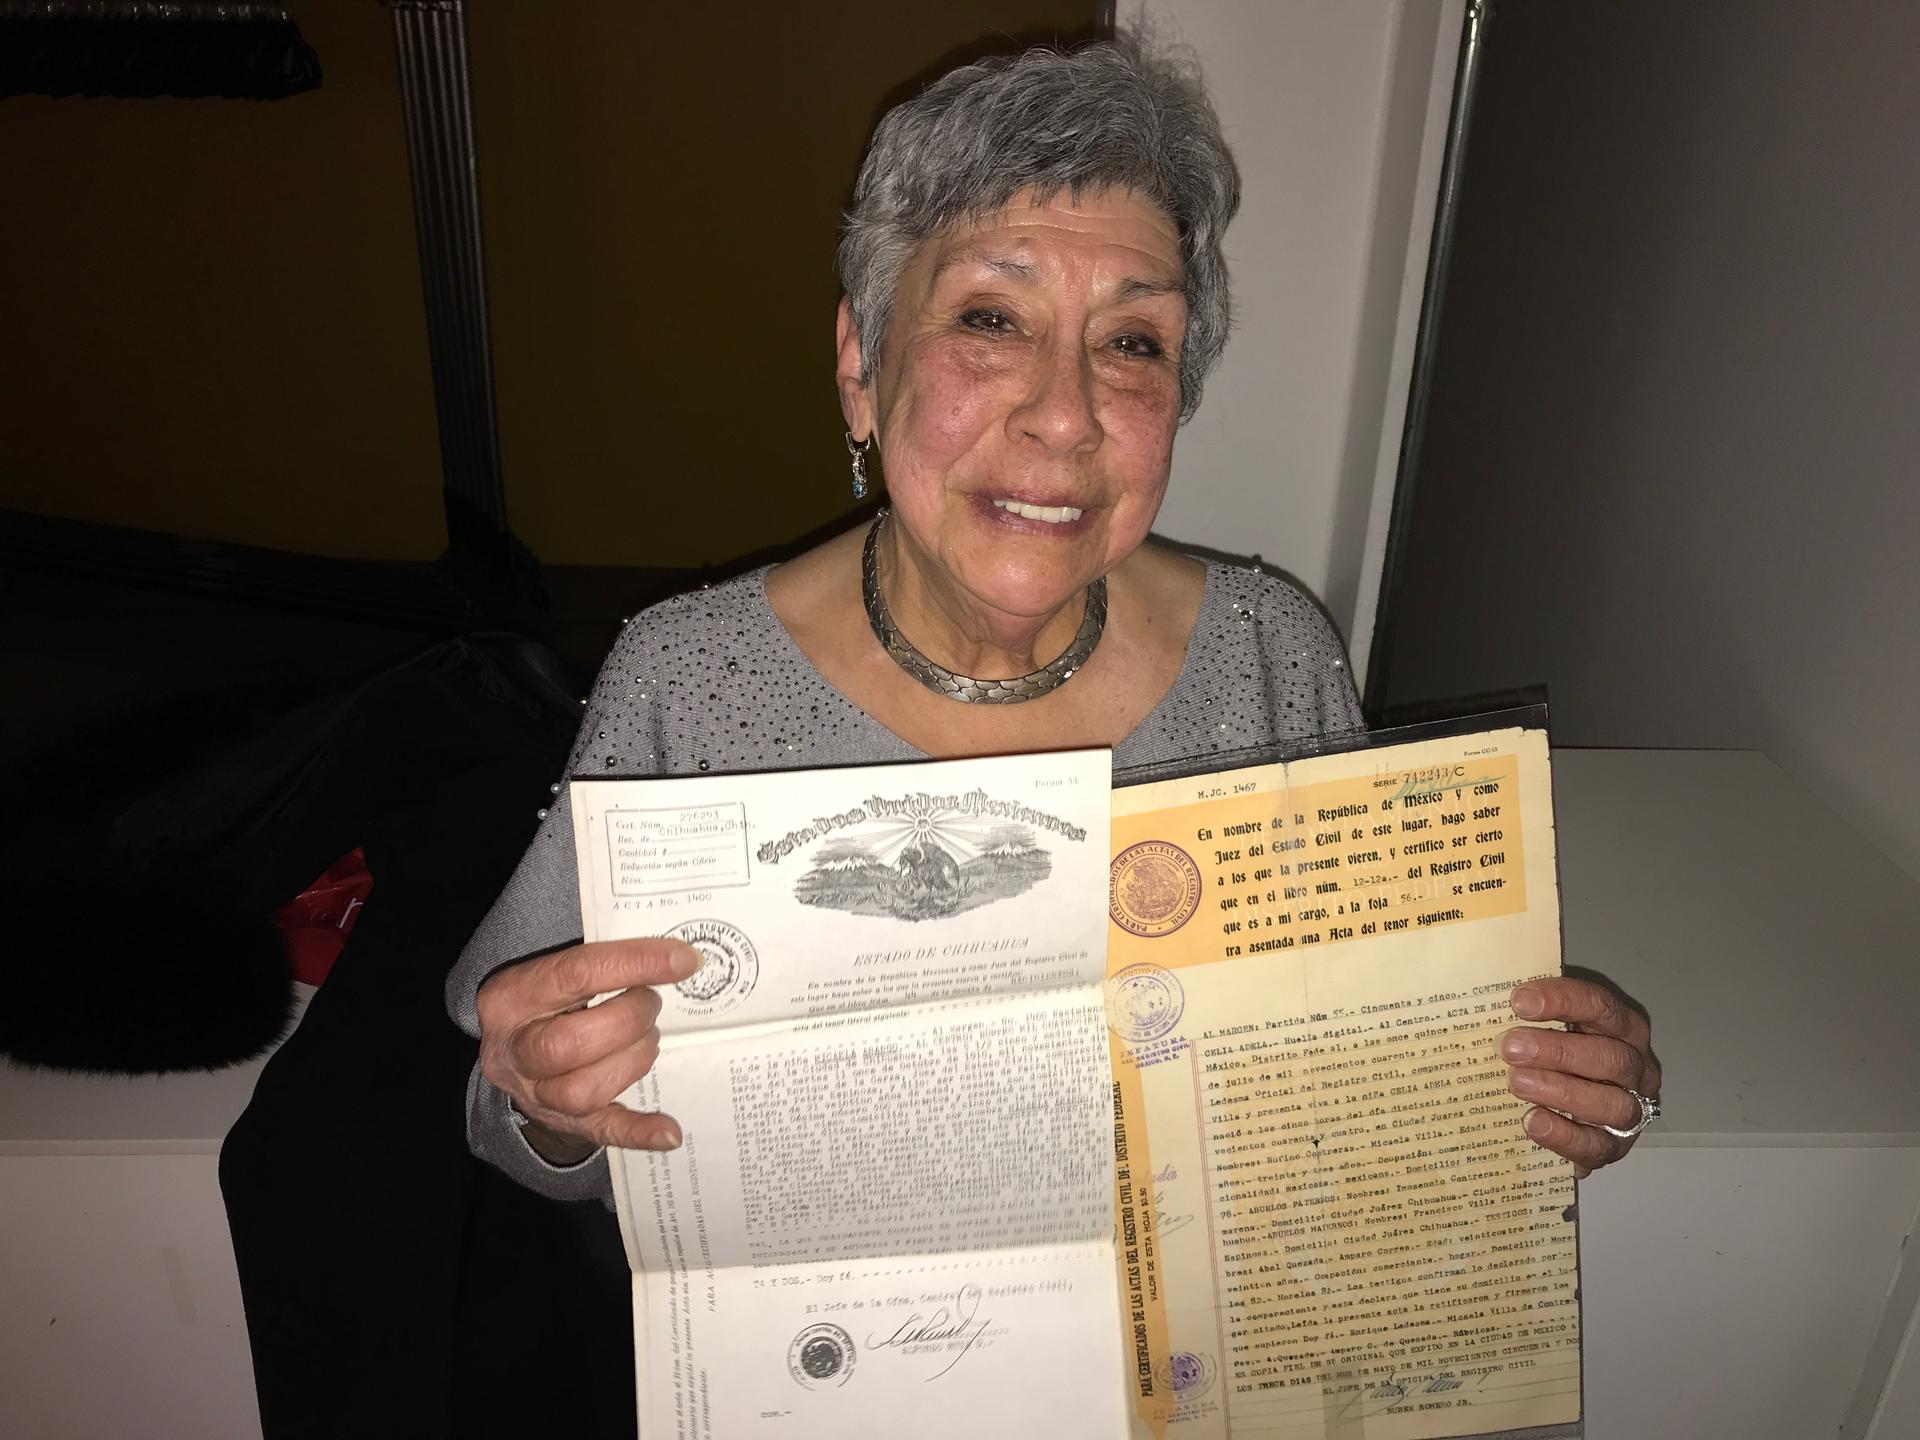 An older woman with grey, short hair and a grey sweater holds up her birth certificate